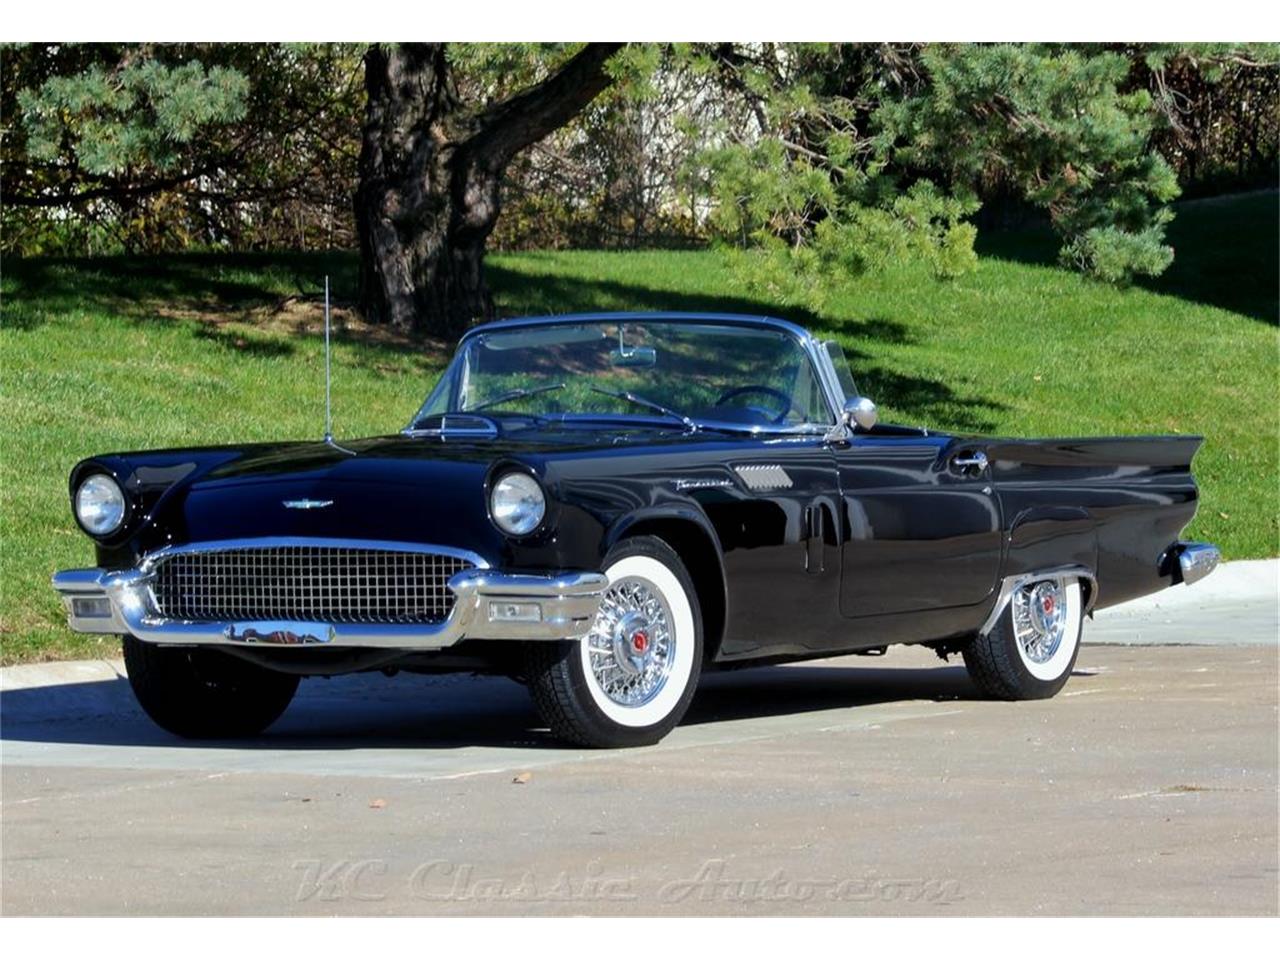 I dont know much about 50s American cars but am just getting interested ...